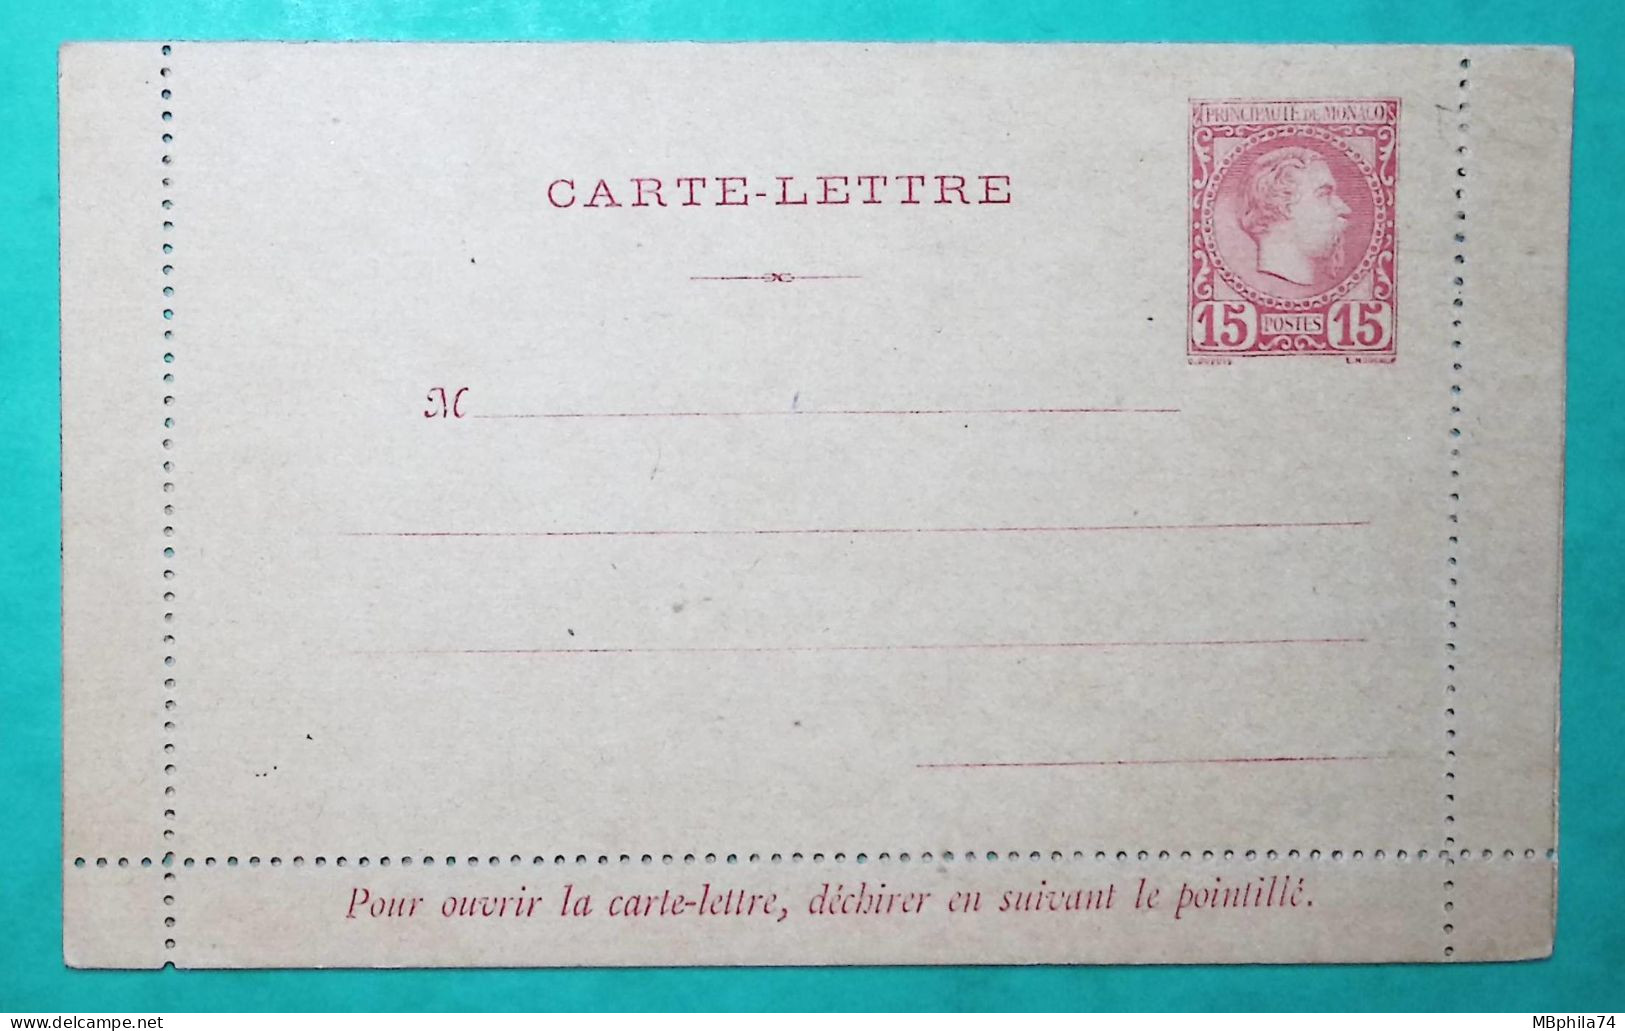 ENTIER 15C ROUGE CARTE LETTRE PRINCE CHARLES III MONACO NEUF COVER - Entiers Postaux